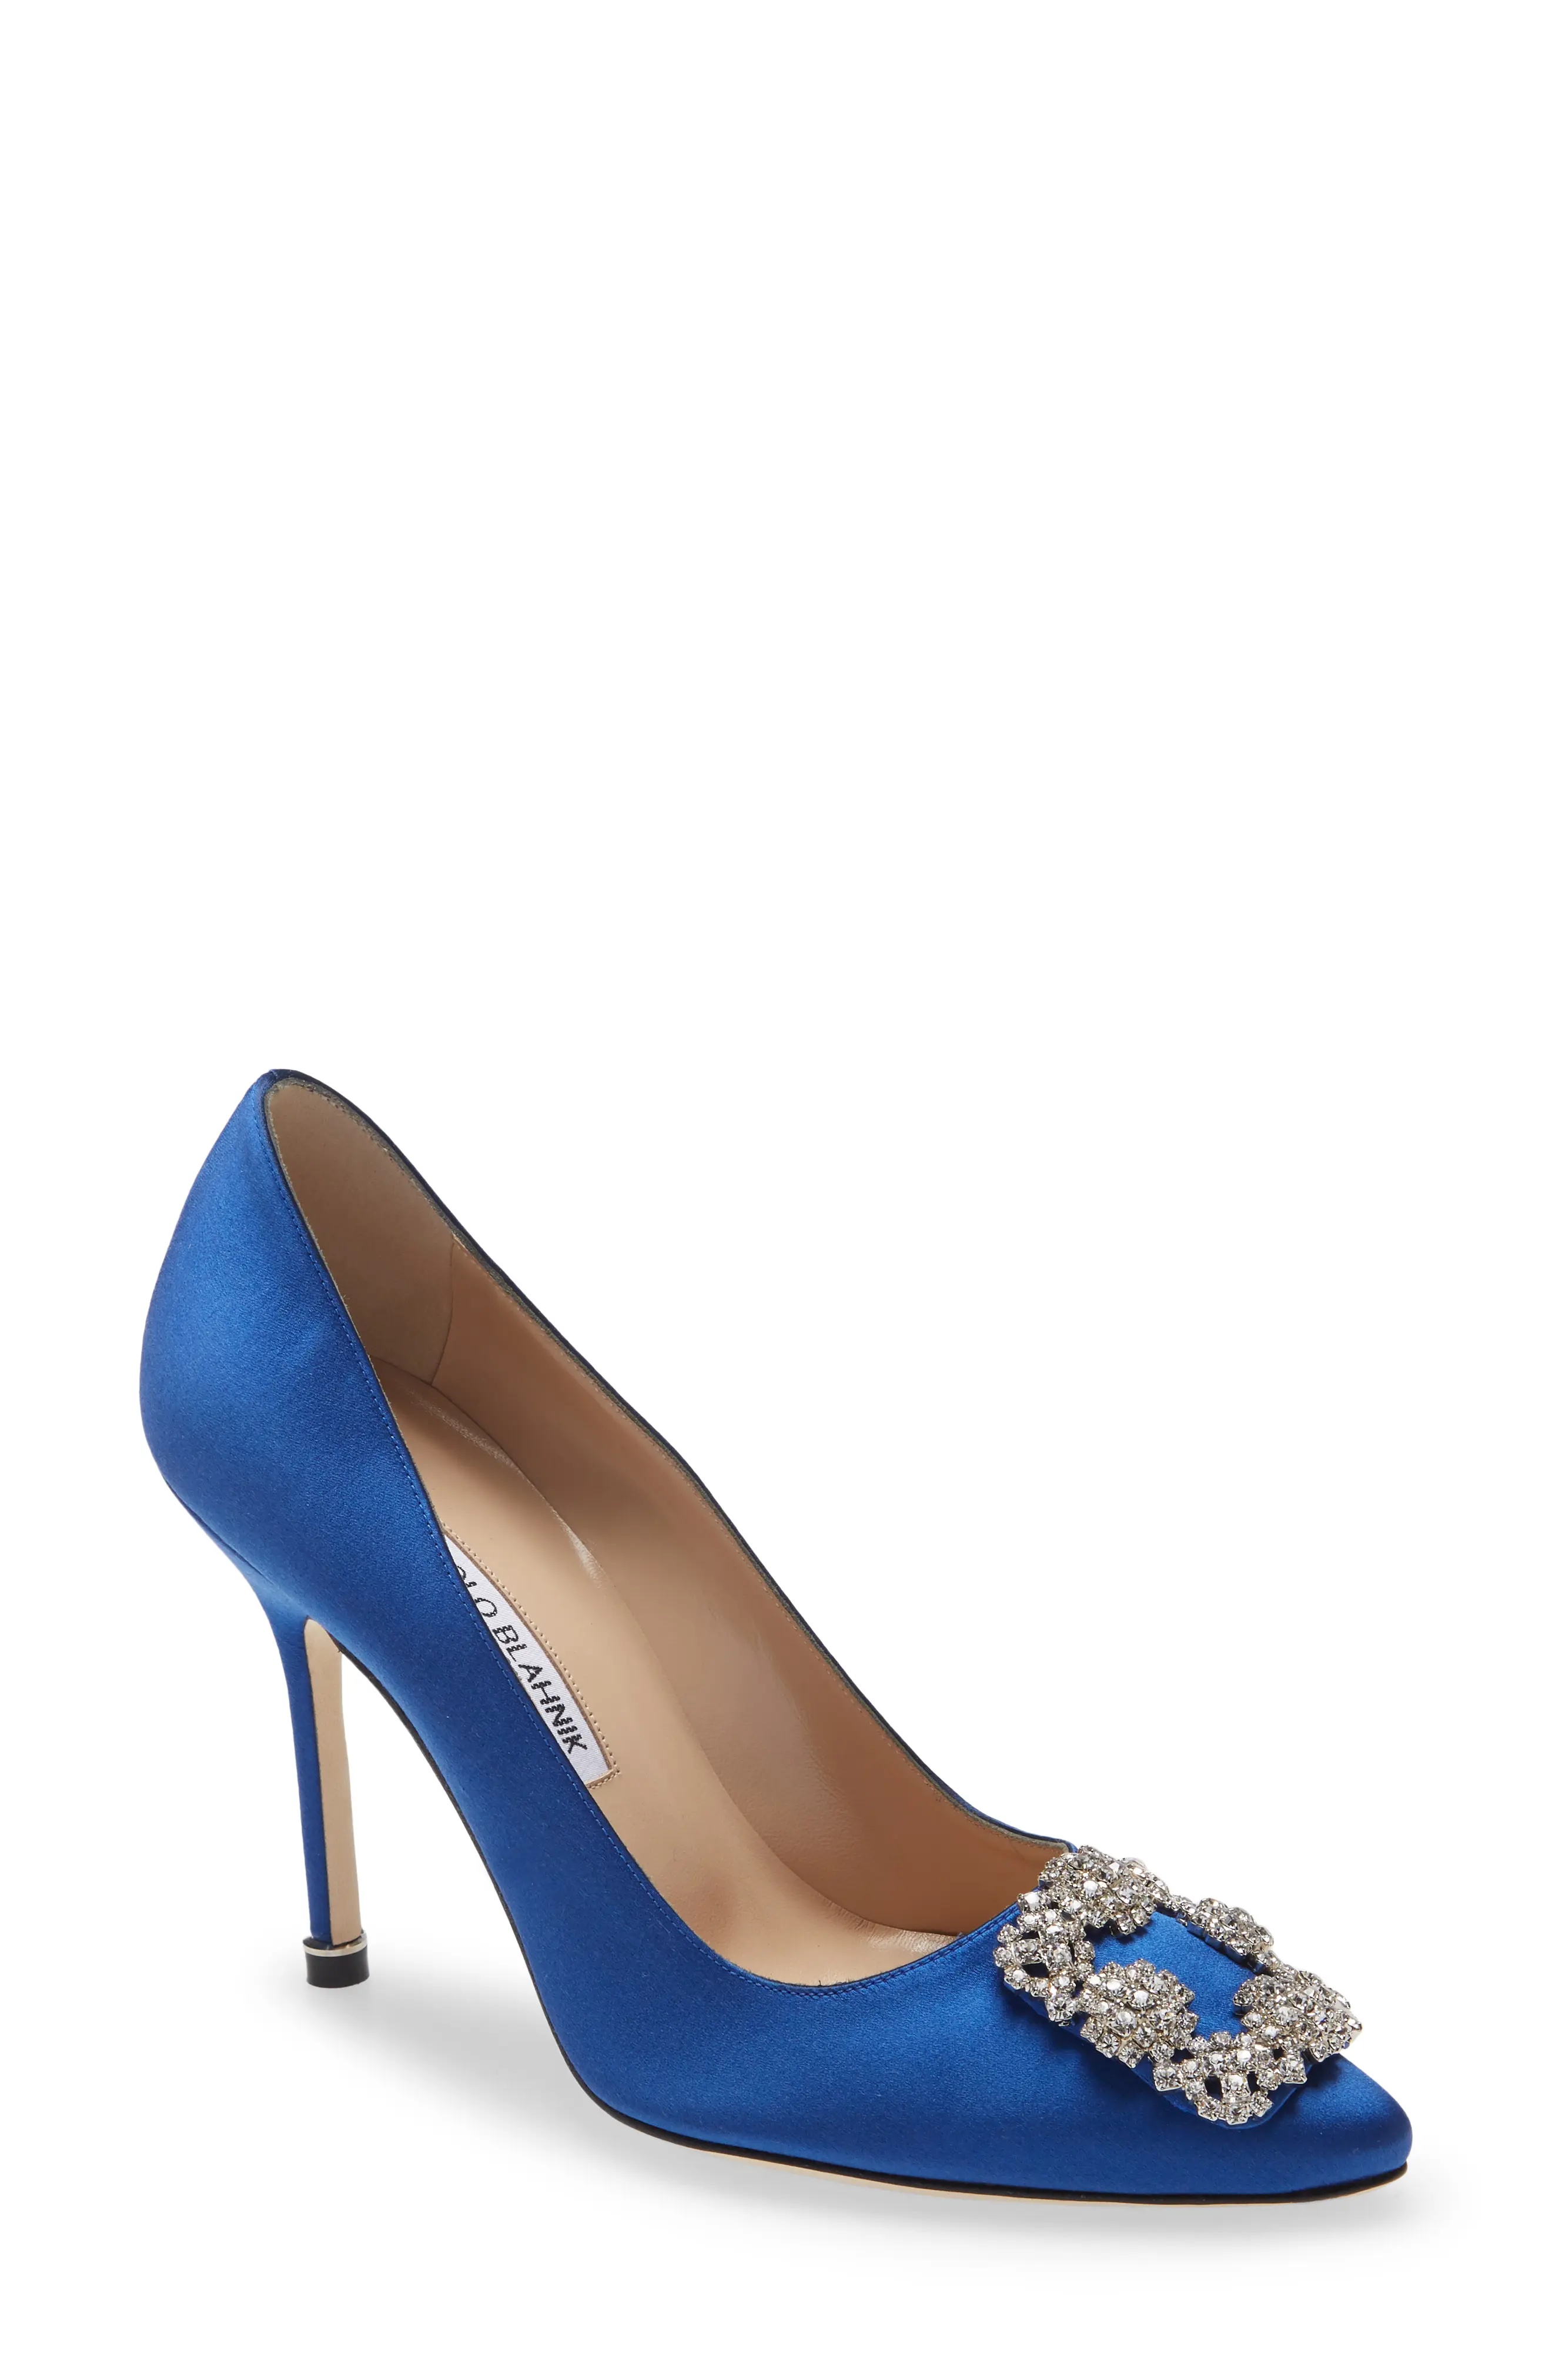 Hangisi Crystal Buckle Pump in Blue Satin Clear/Buckle - 1